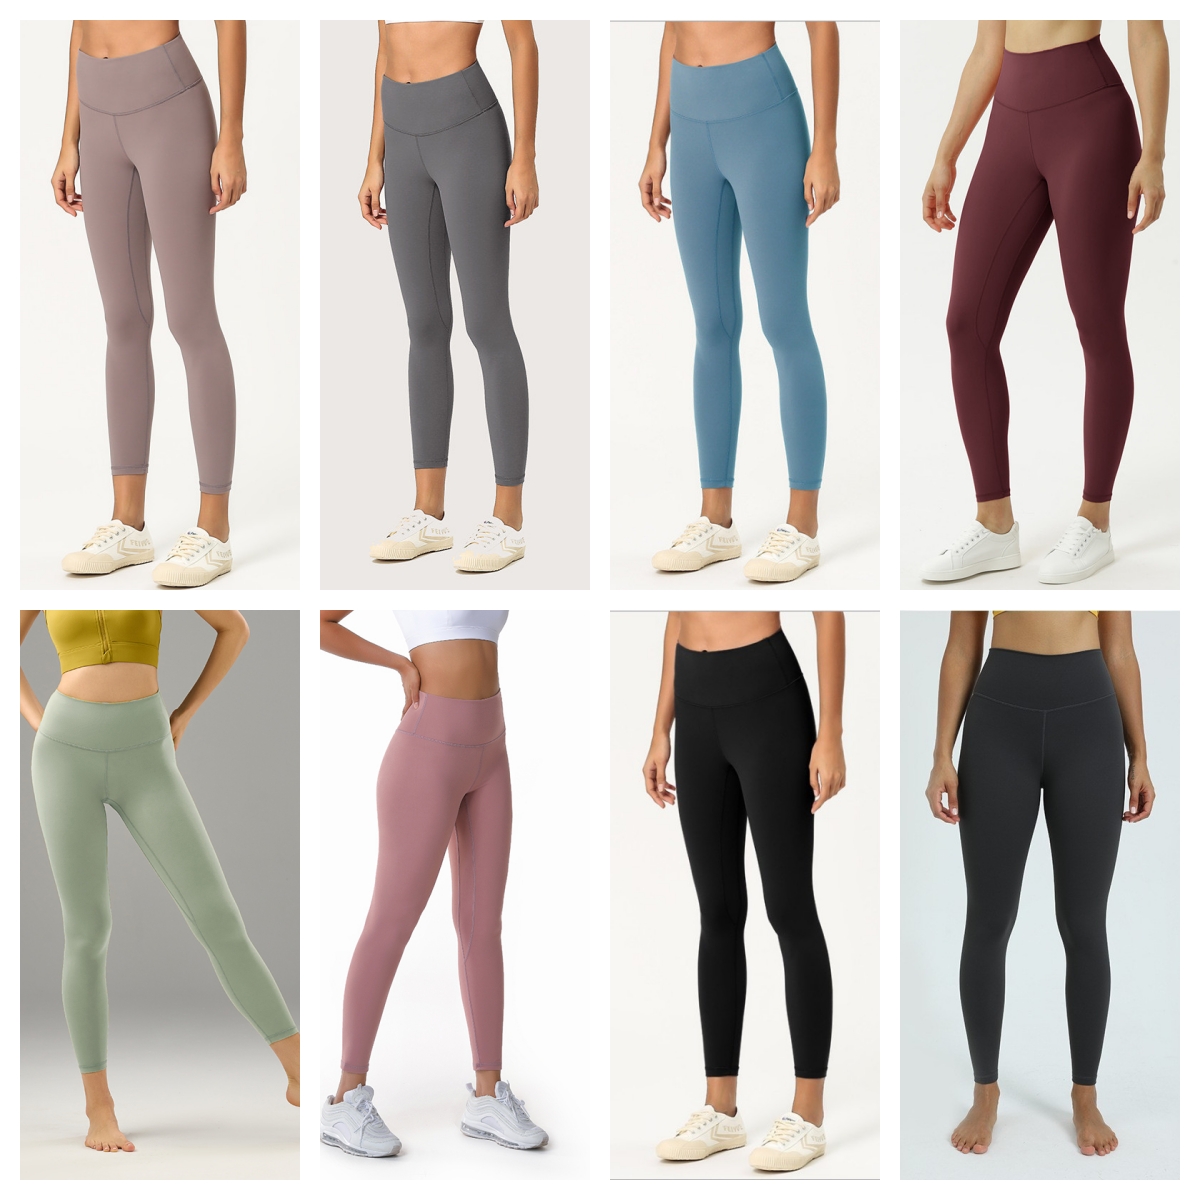 LU High Waisted Leggings for Women Costumes - Buttery Soft Tummy Control Yoga Pants for Workout Running